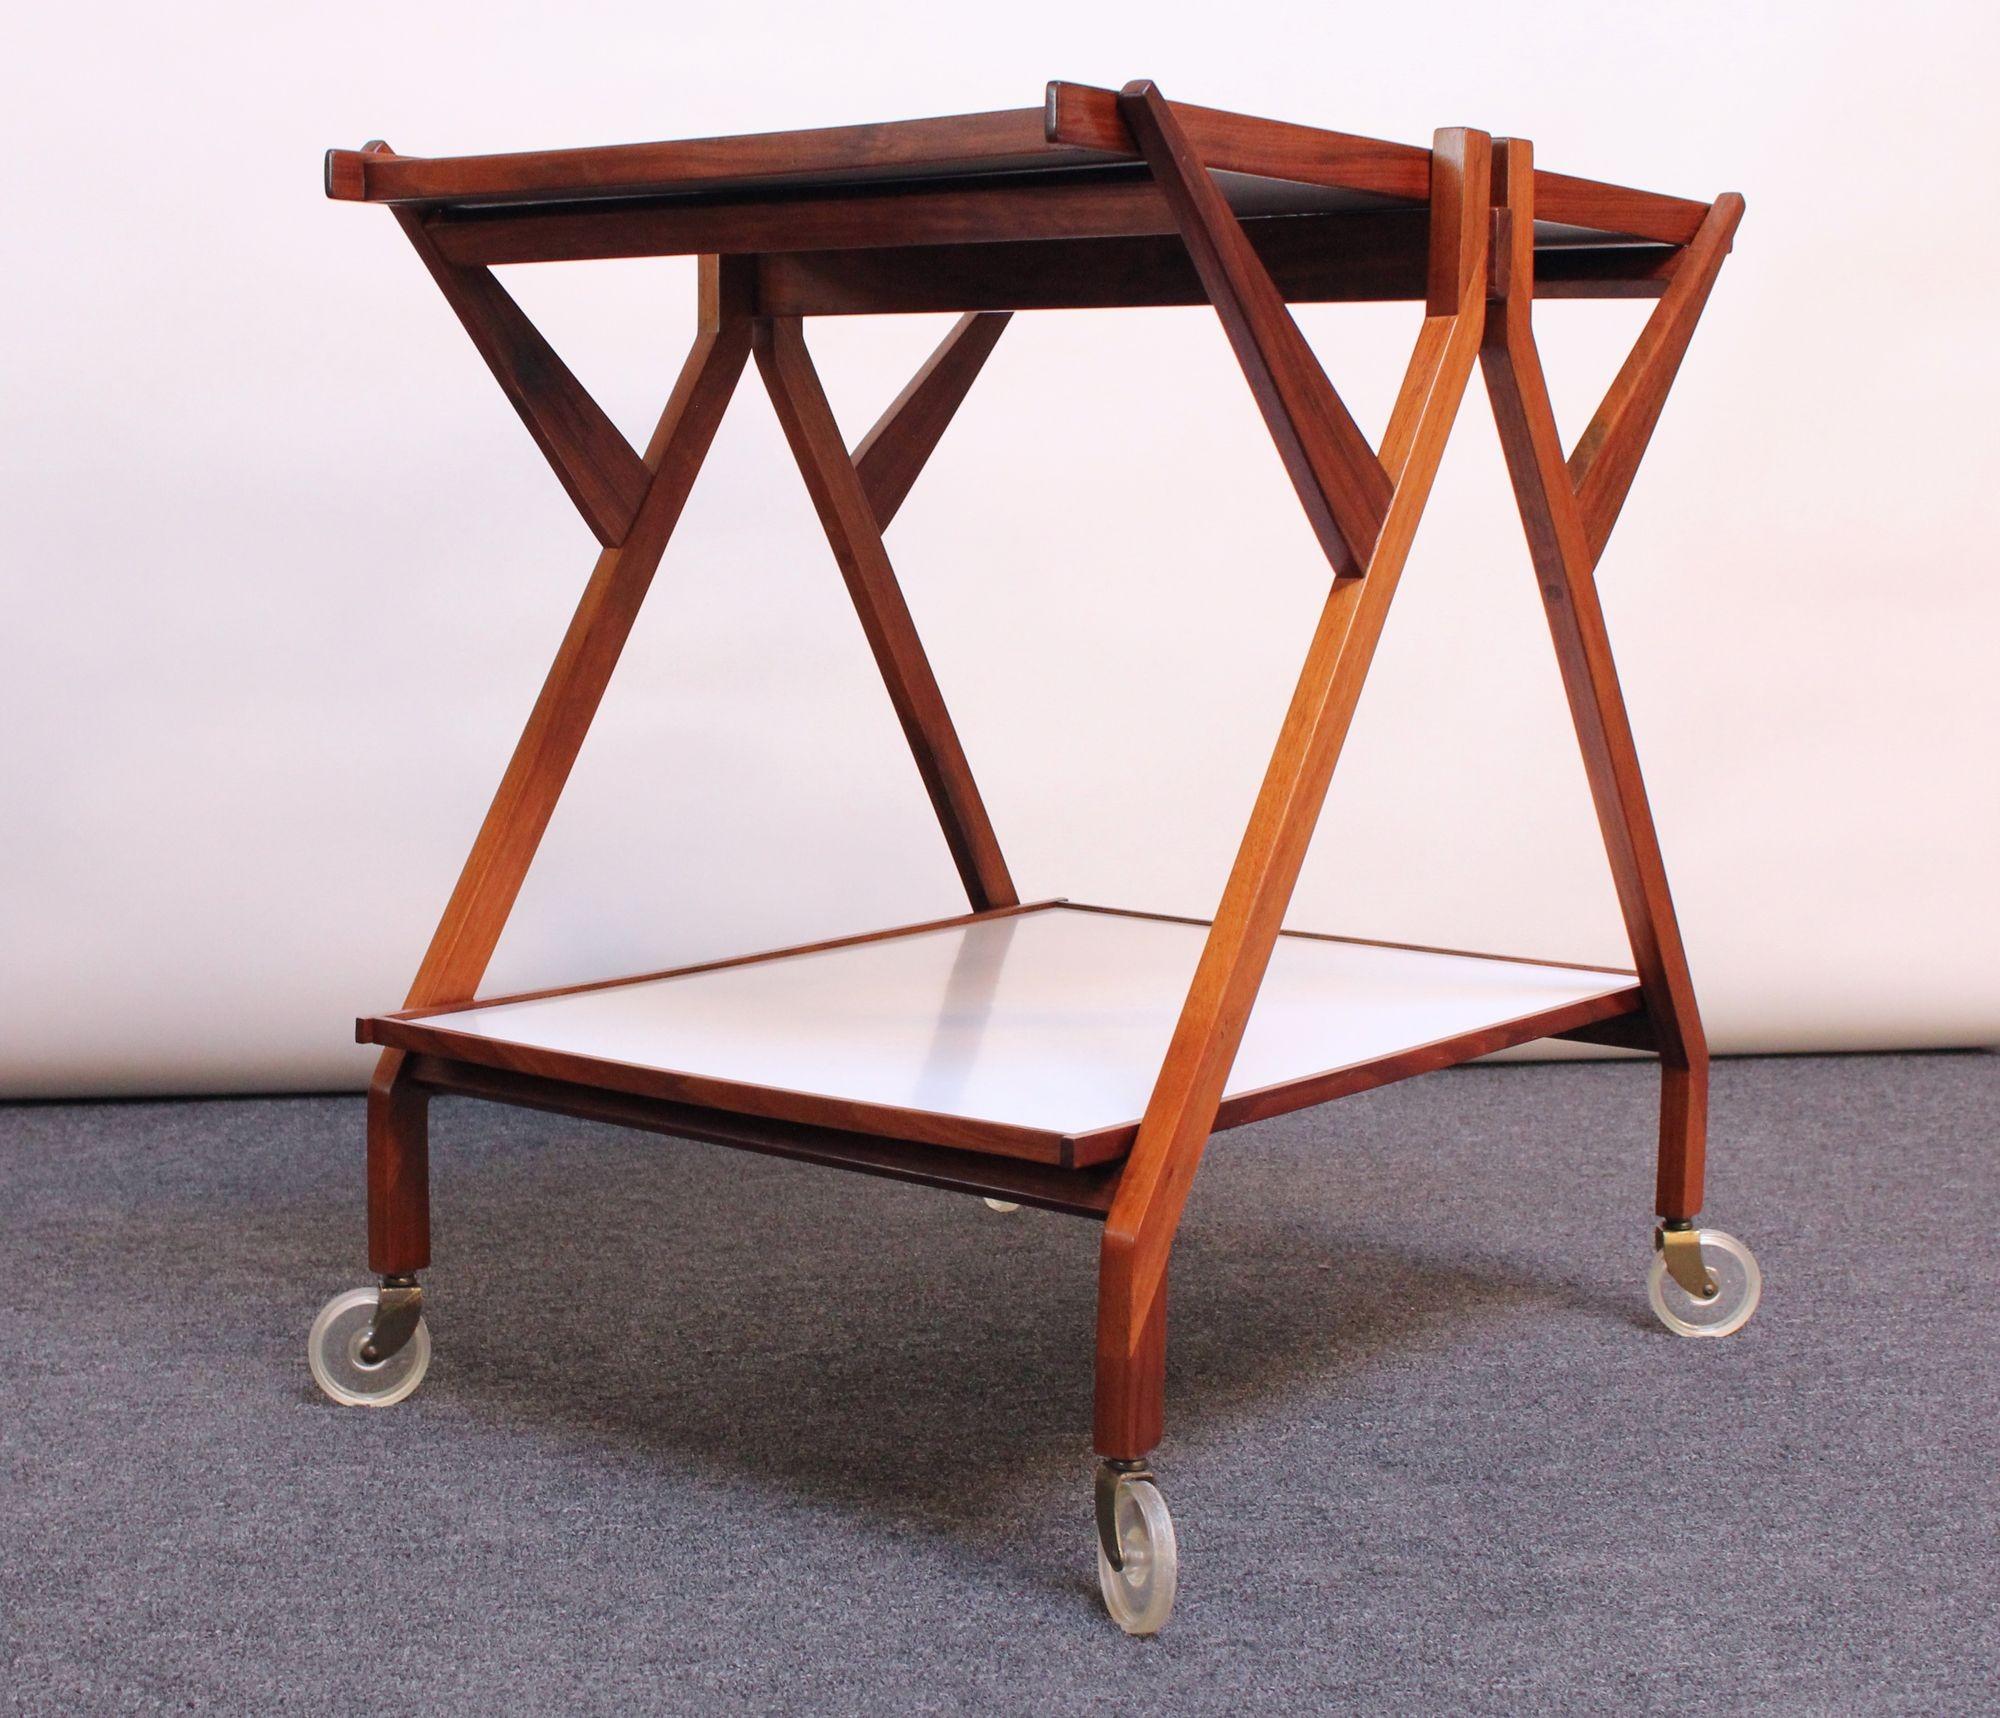 Sculptural Modernist walnut bar cart/trolley with two laminate surfaces, all supported by caster wheels (ca. 1960s, Italy). Sharp, crisp lines and superior craftsmanship utilizing complex wood joinery techniques, though designer is unknown. 
Top